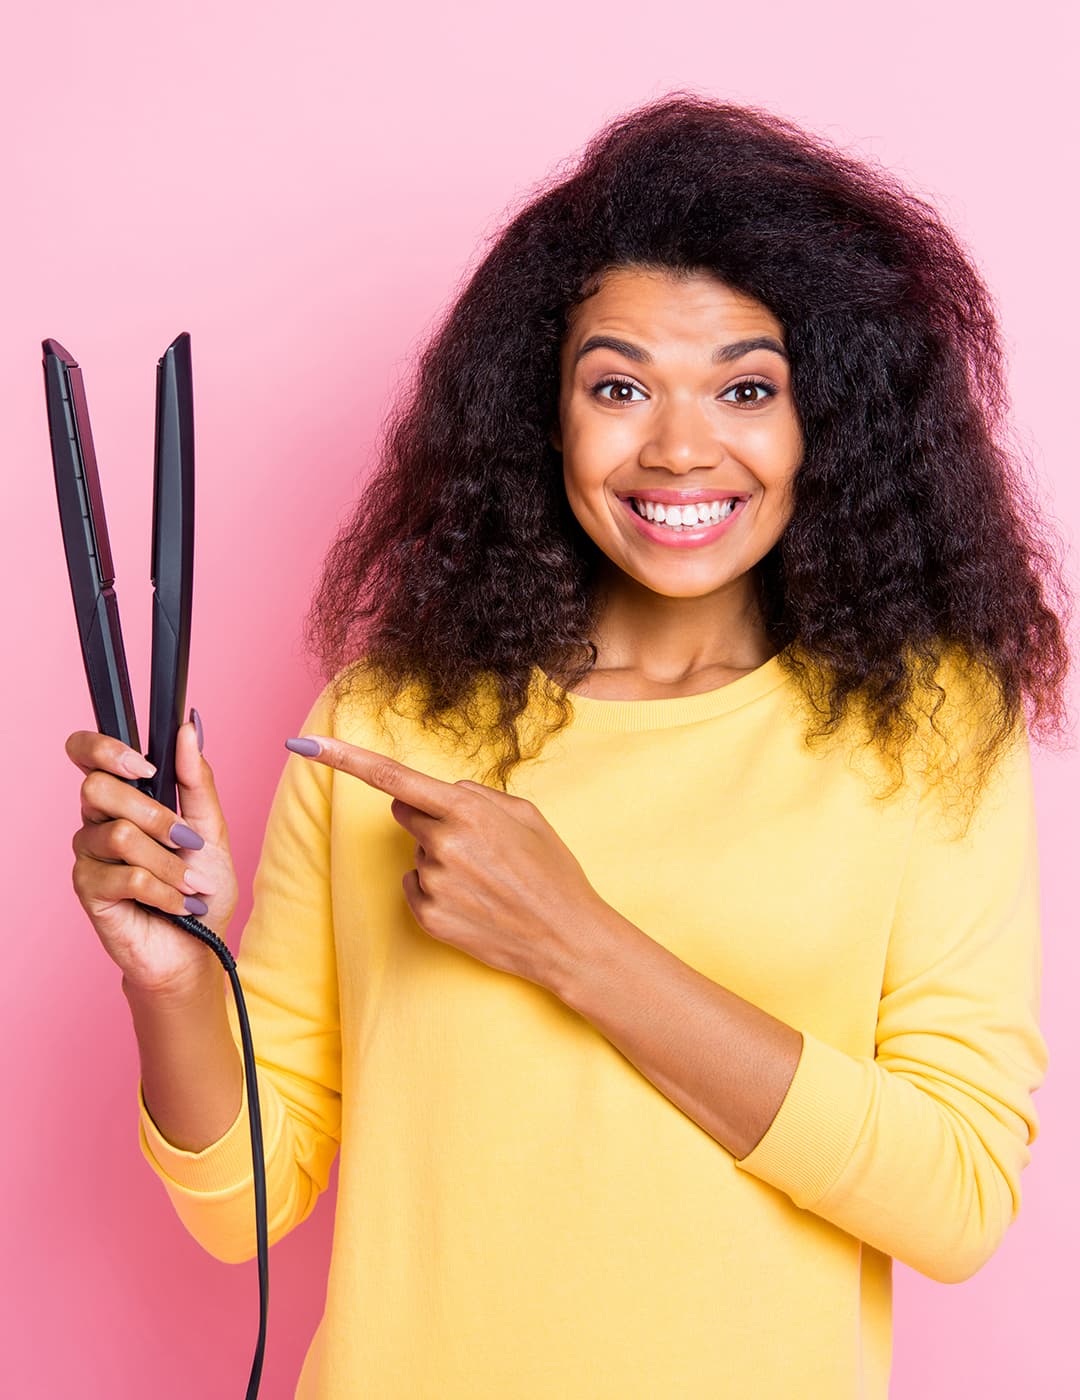 An image of a curly-haired woman showing a cheerful smile while holding a flat iron on a pink background